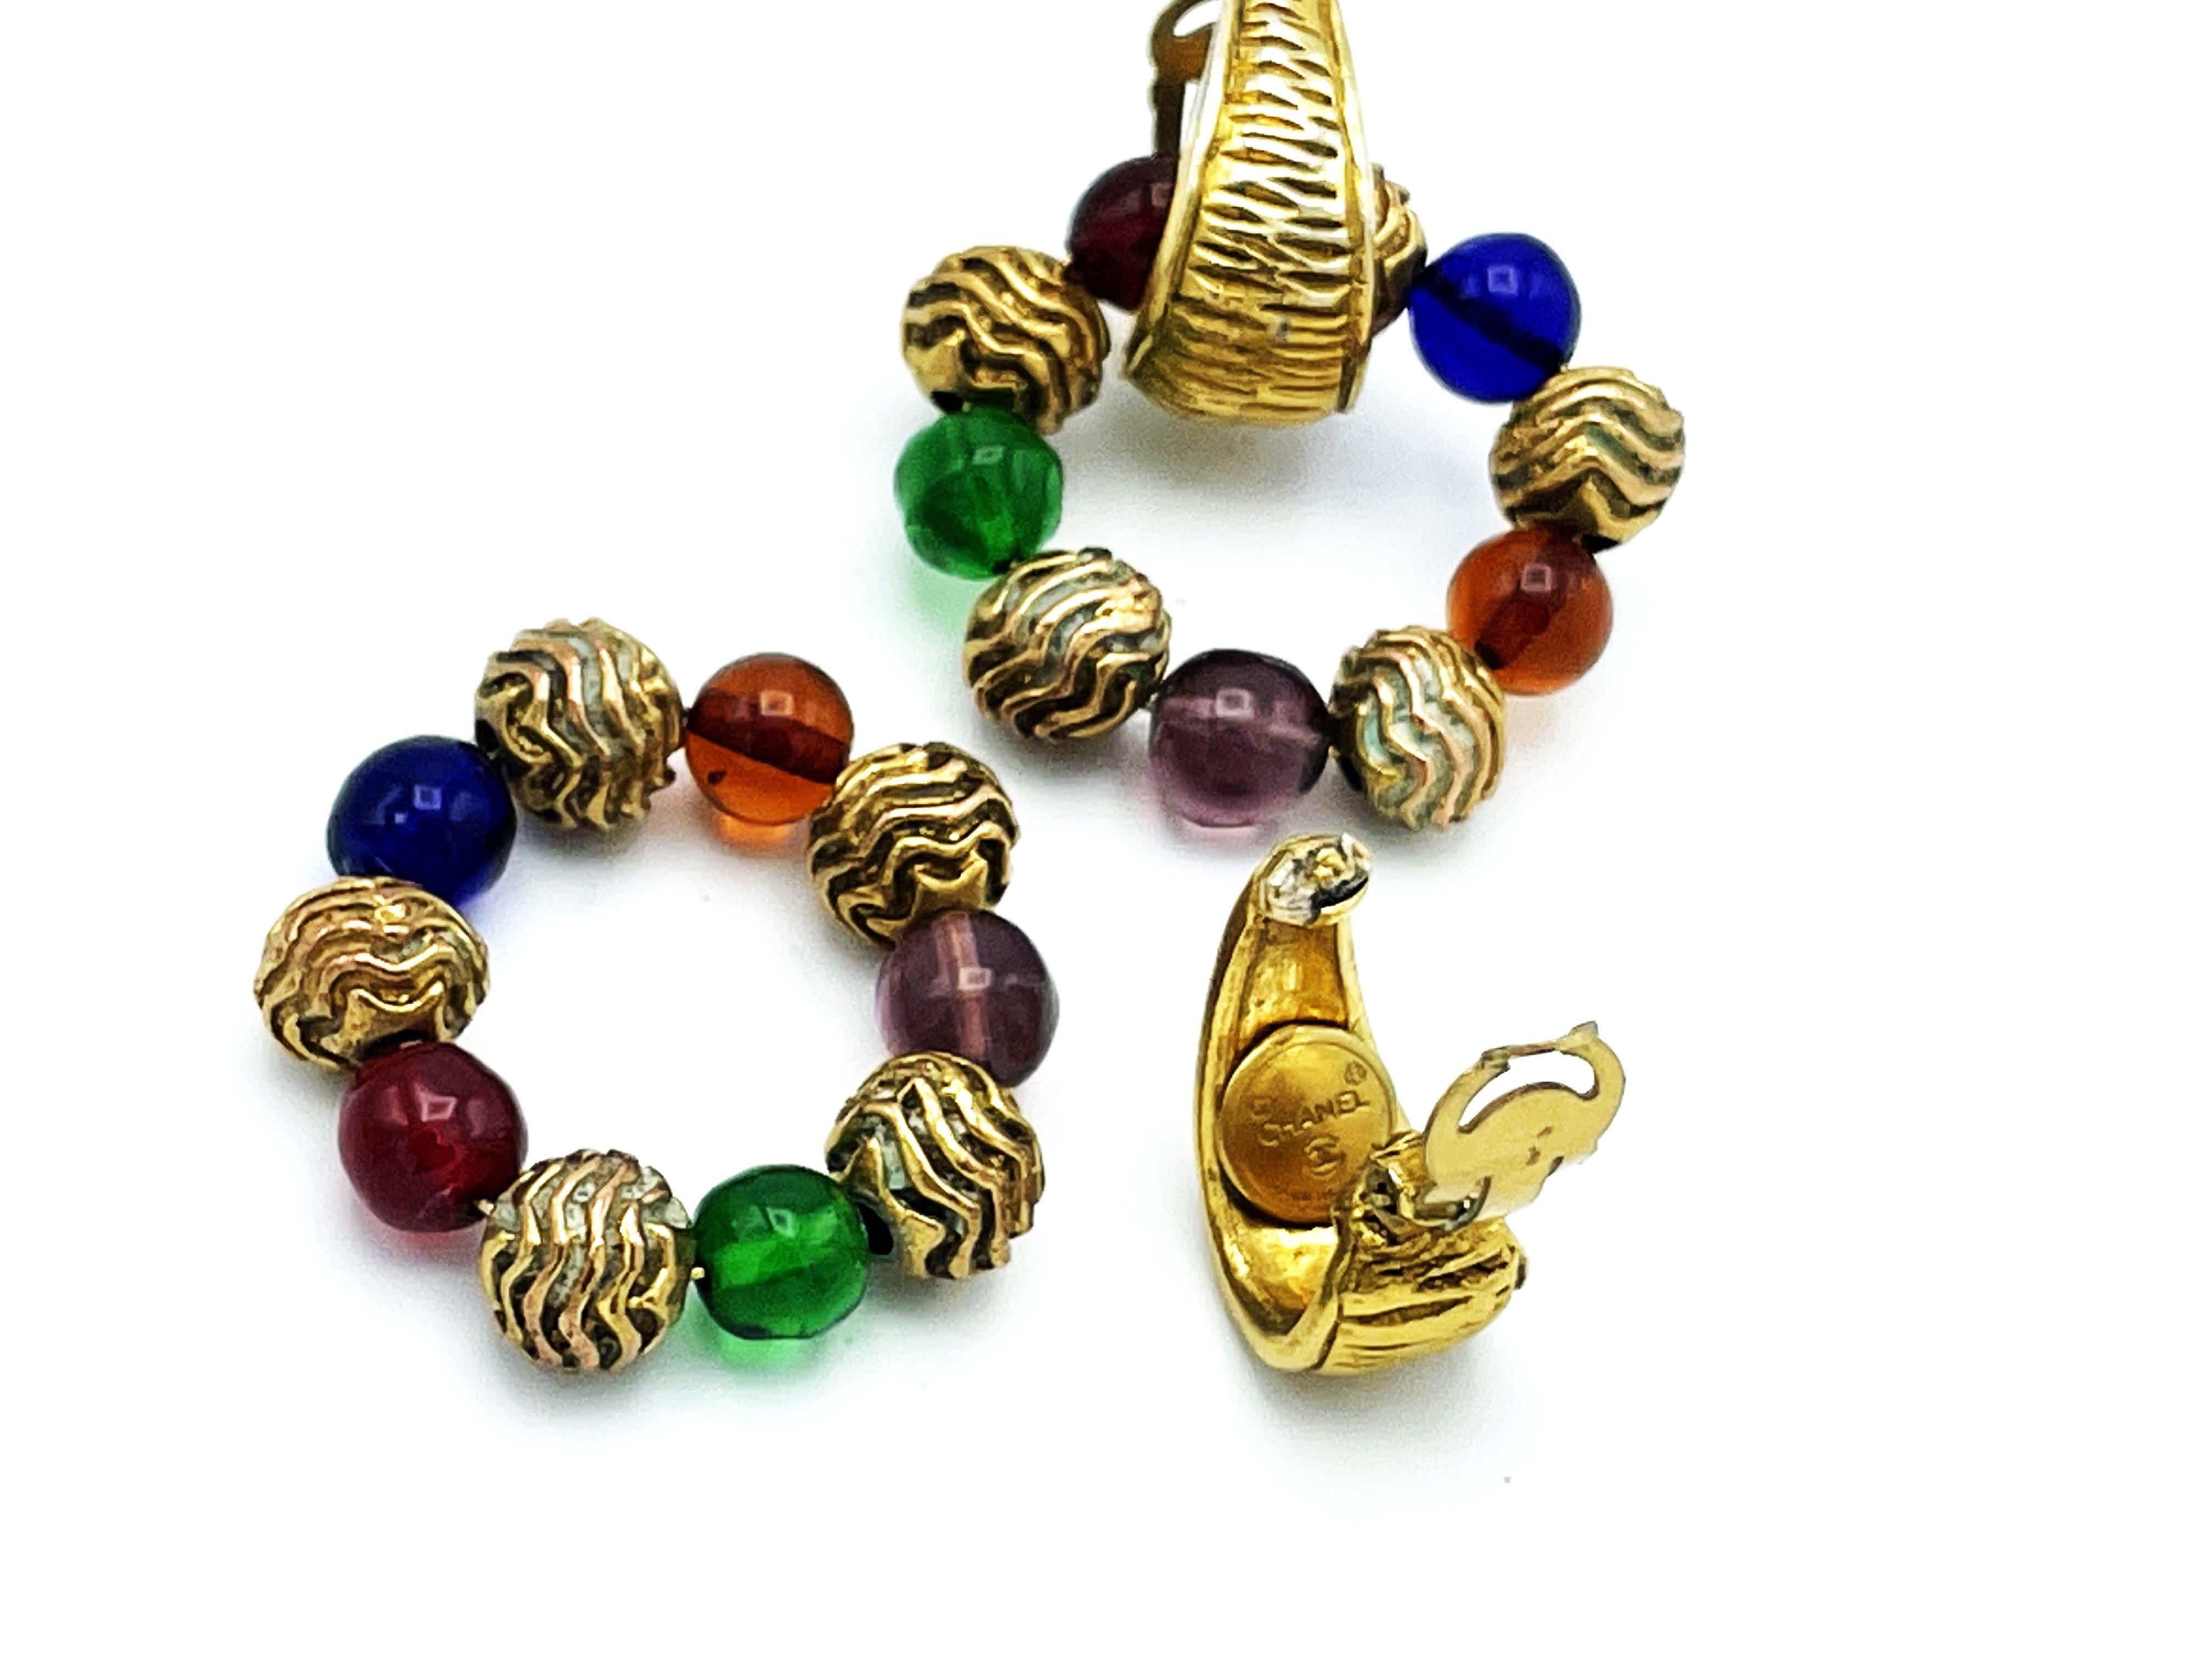 Women's Chanel 2 way clip-on earring Creole with Gripoix and gold balls, 1970/80s, Paris For Sale